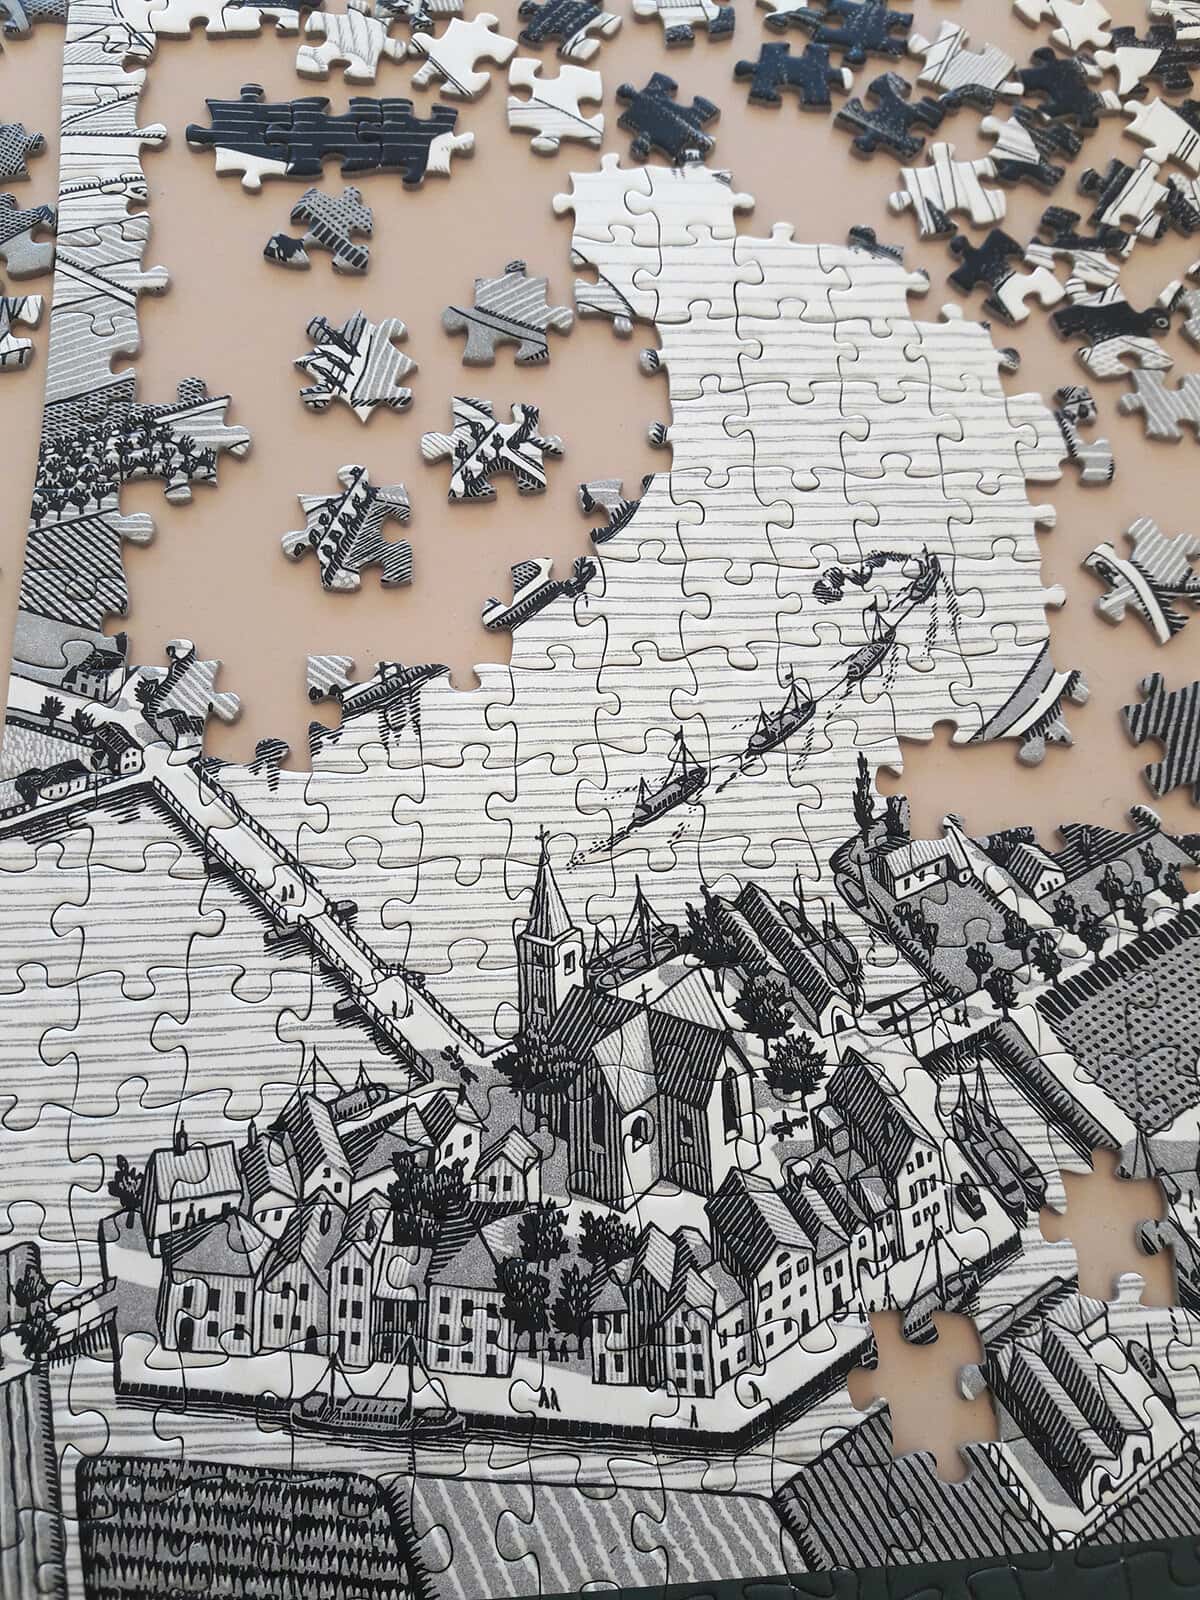 do puzzles help with problem solving